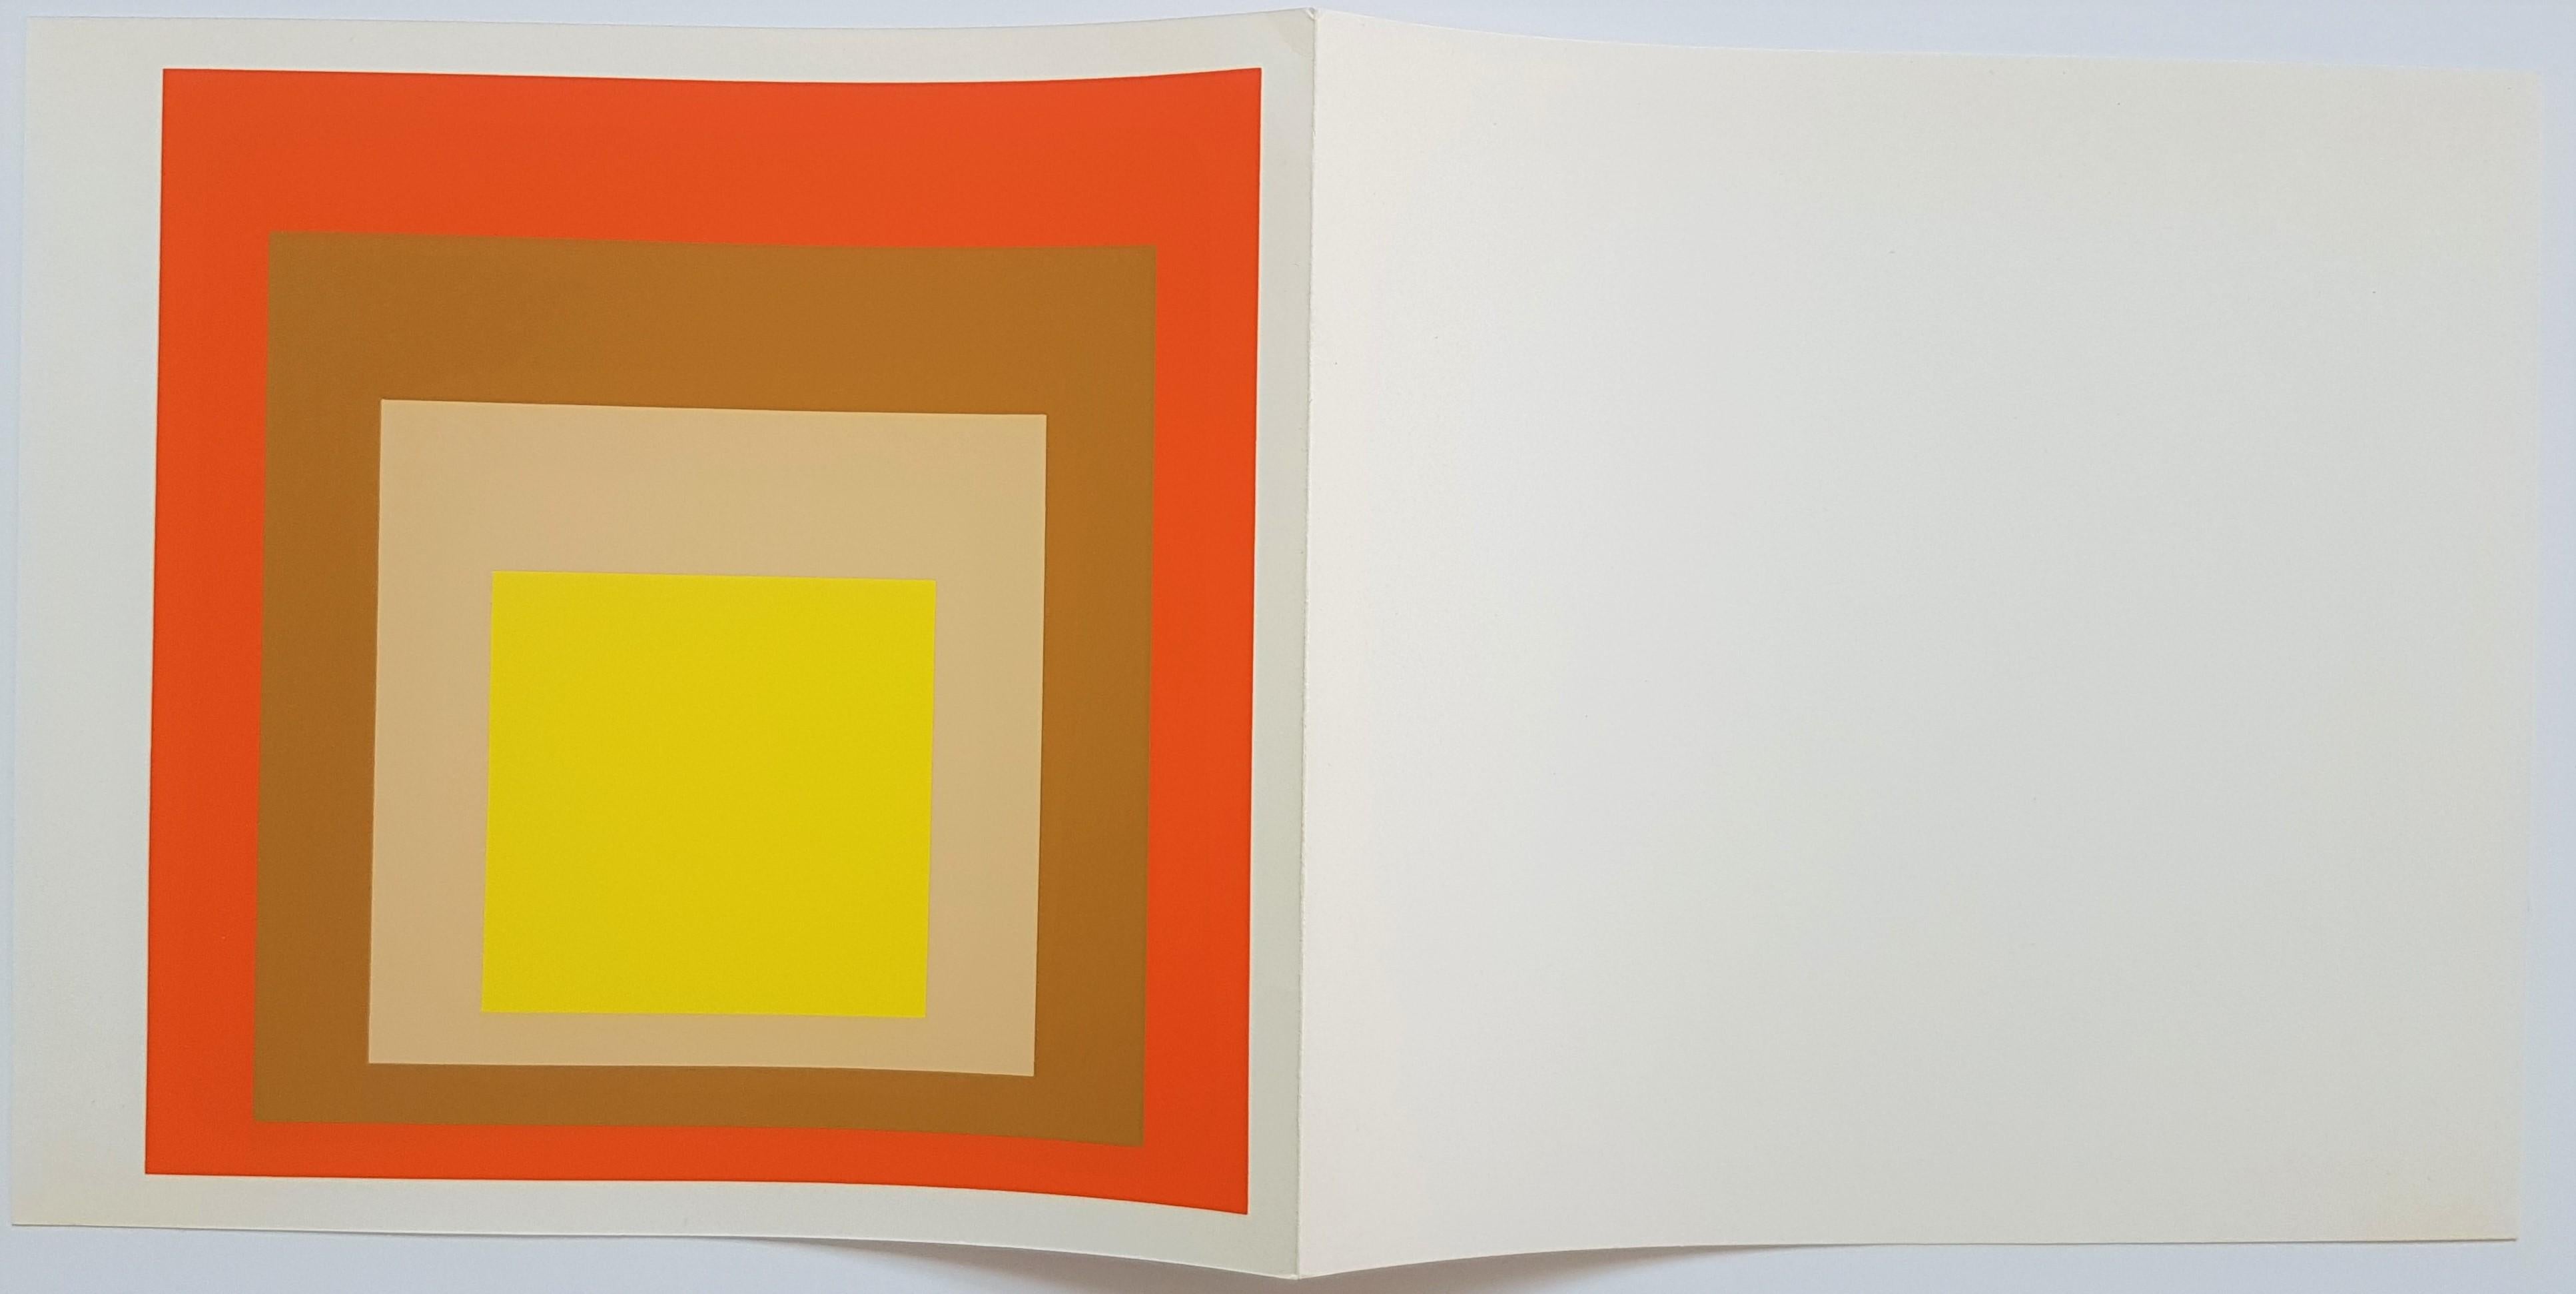 Homage to the Square: Yes Sir (~35% OFF LIST PRICE - LIMITED TIME ONLY) - Print by (after) Josef Albers